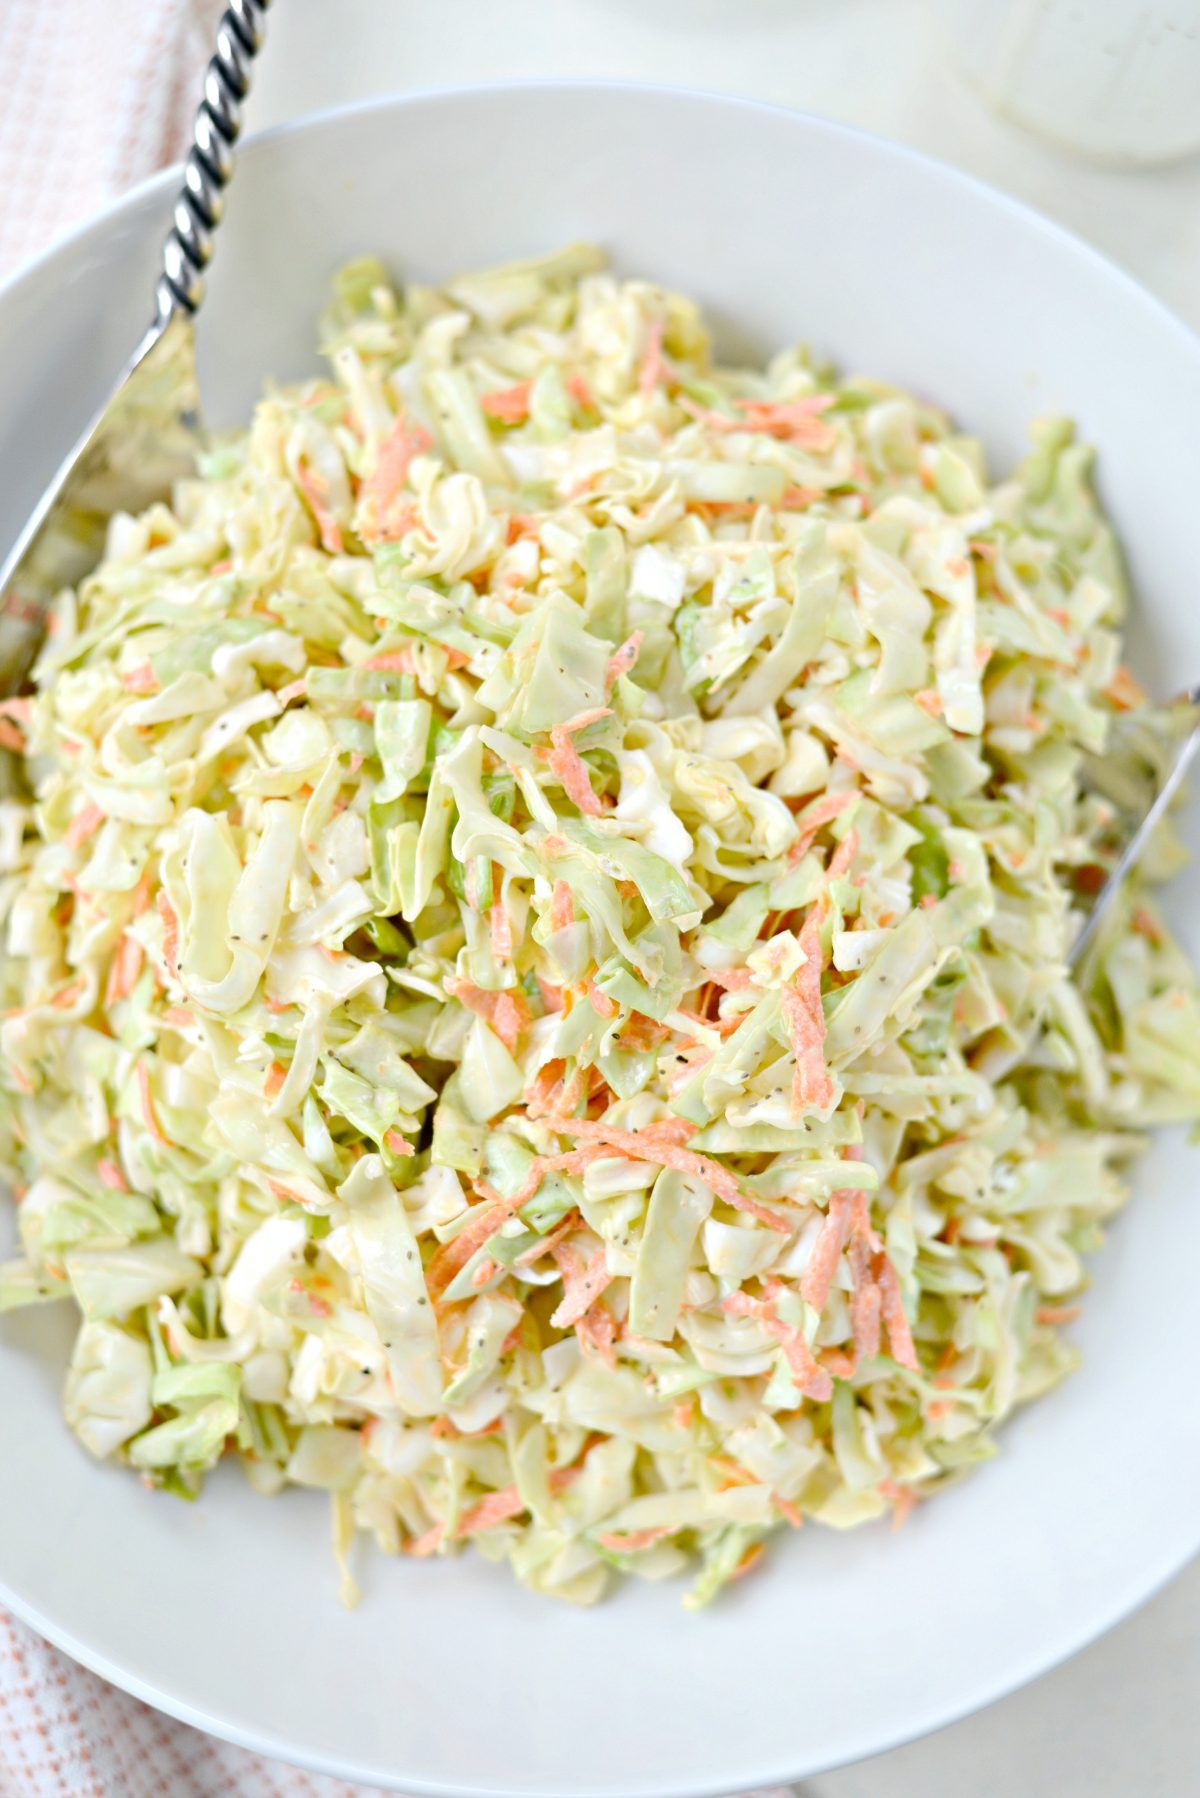 Classic Coleslaw Recipe with Homemade Dressing